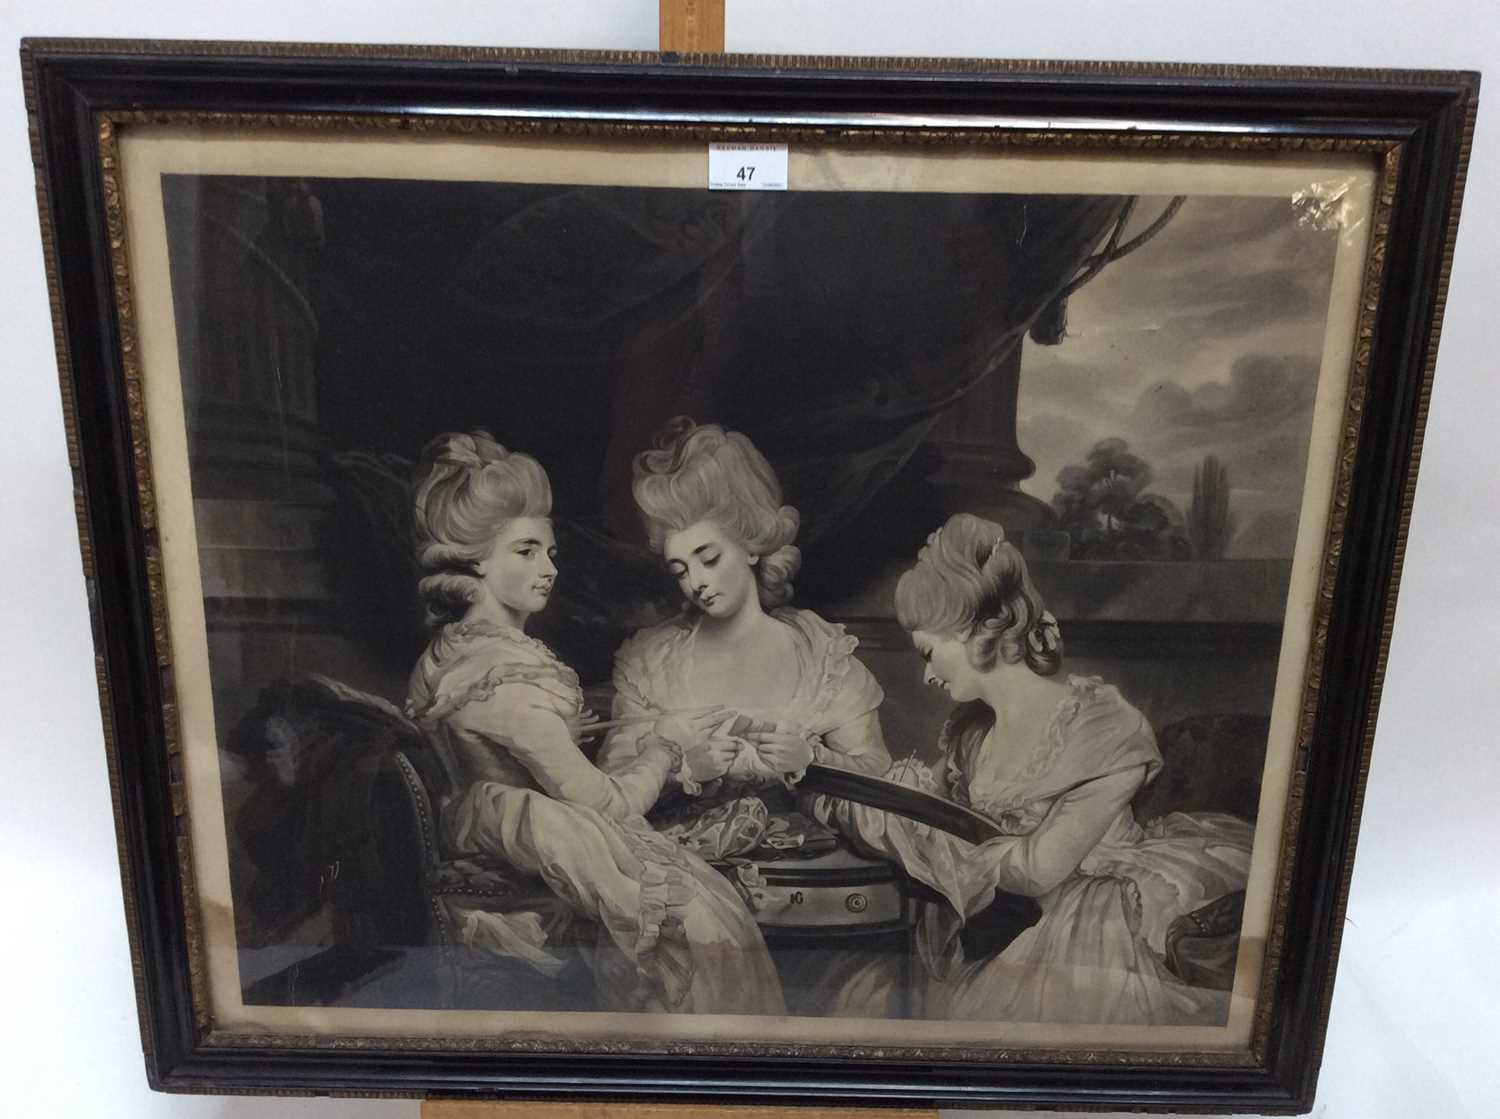 Lot 47 - After Reynolds, black and white engraving - The Ladies Waldegrave, 50cm x 60cm, in glazed gilt and ebonised frame